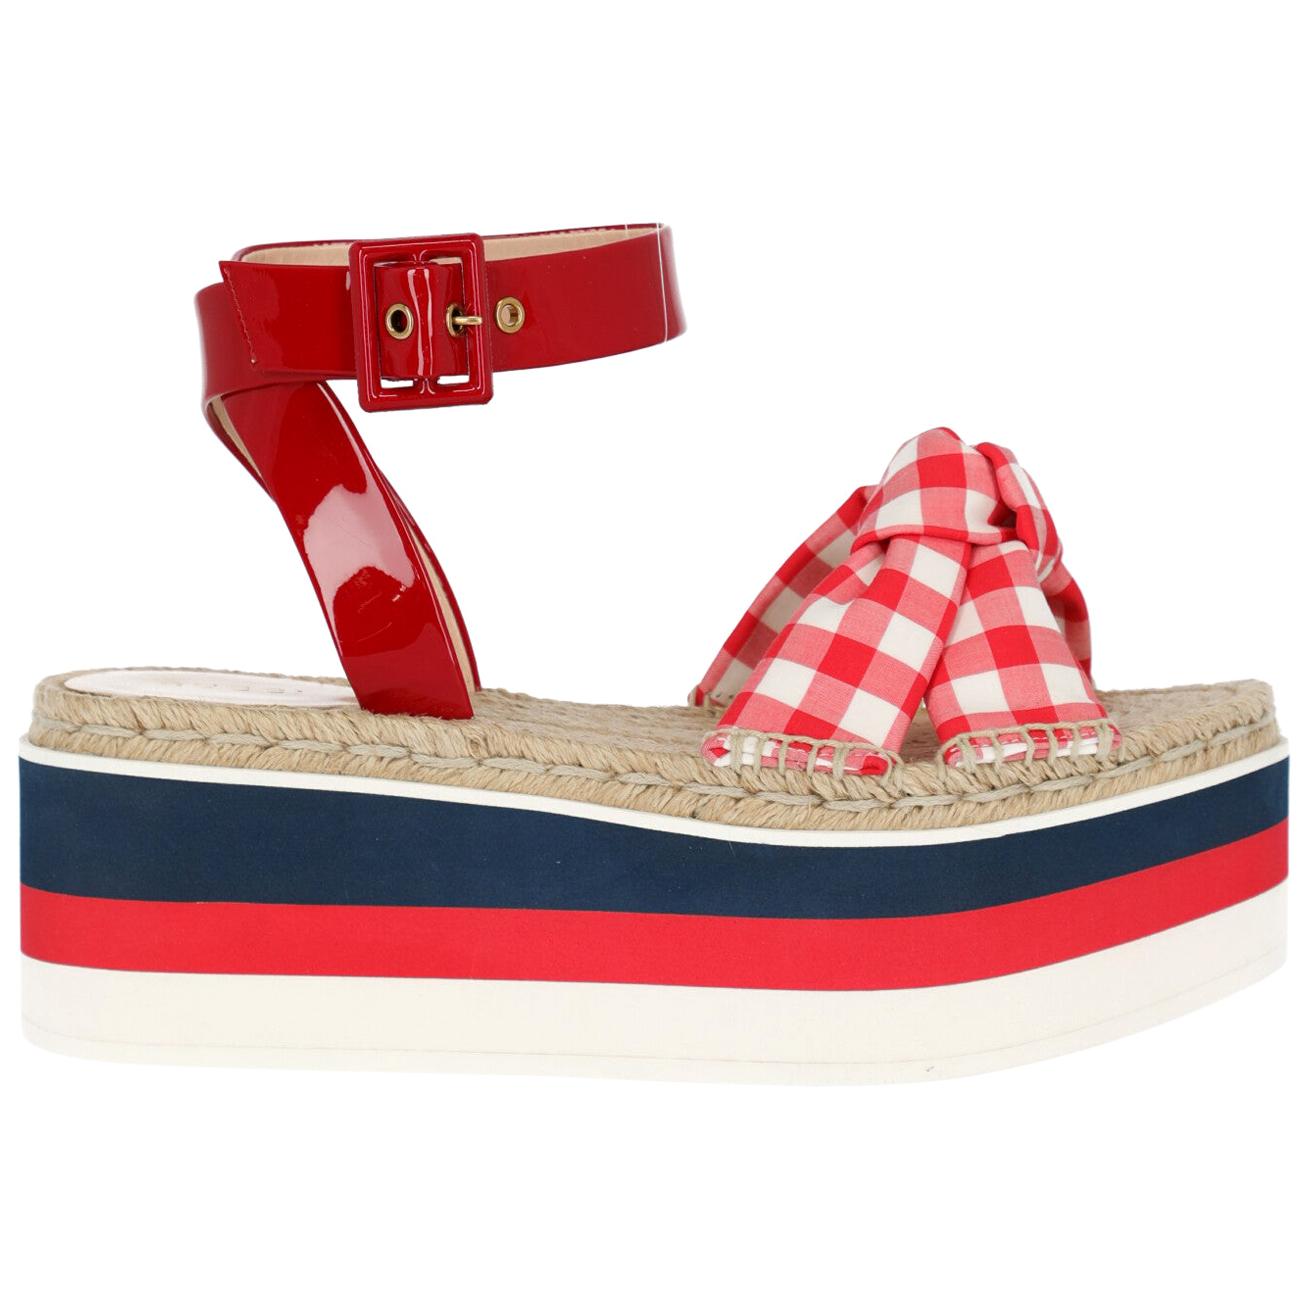 Gucci Women's Wedges Red/White Fabric  IT 39, 5 For Sale